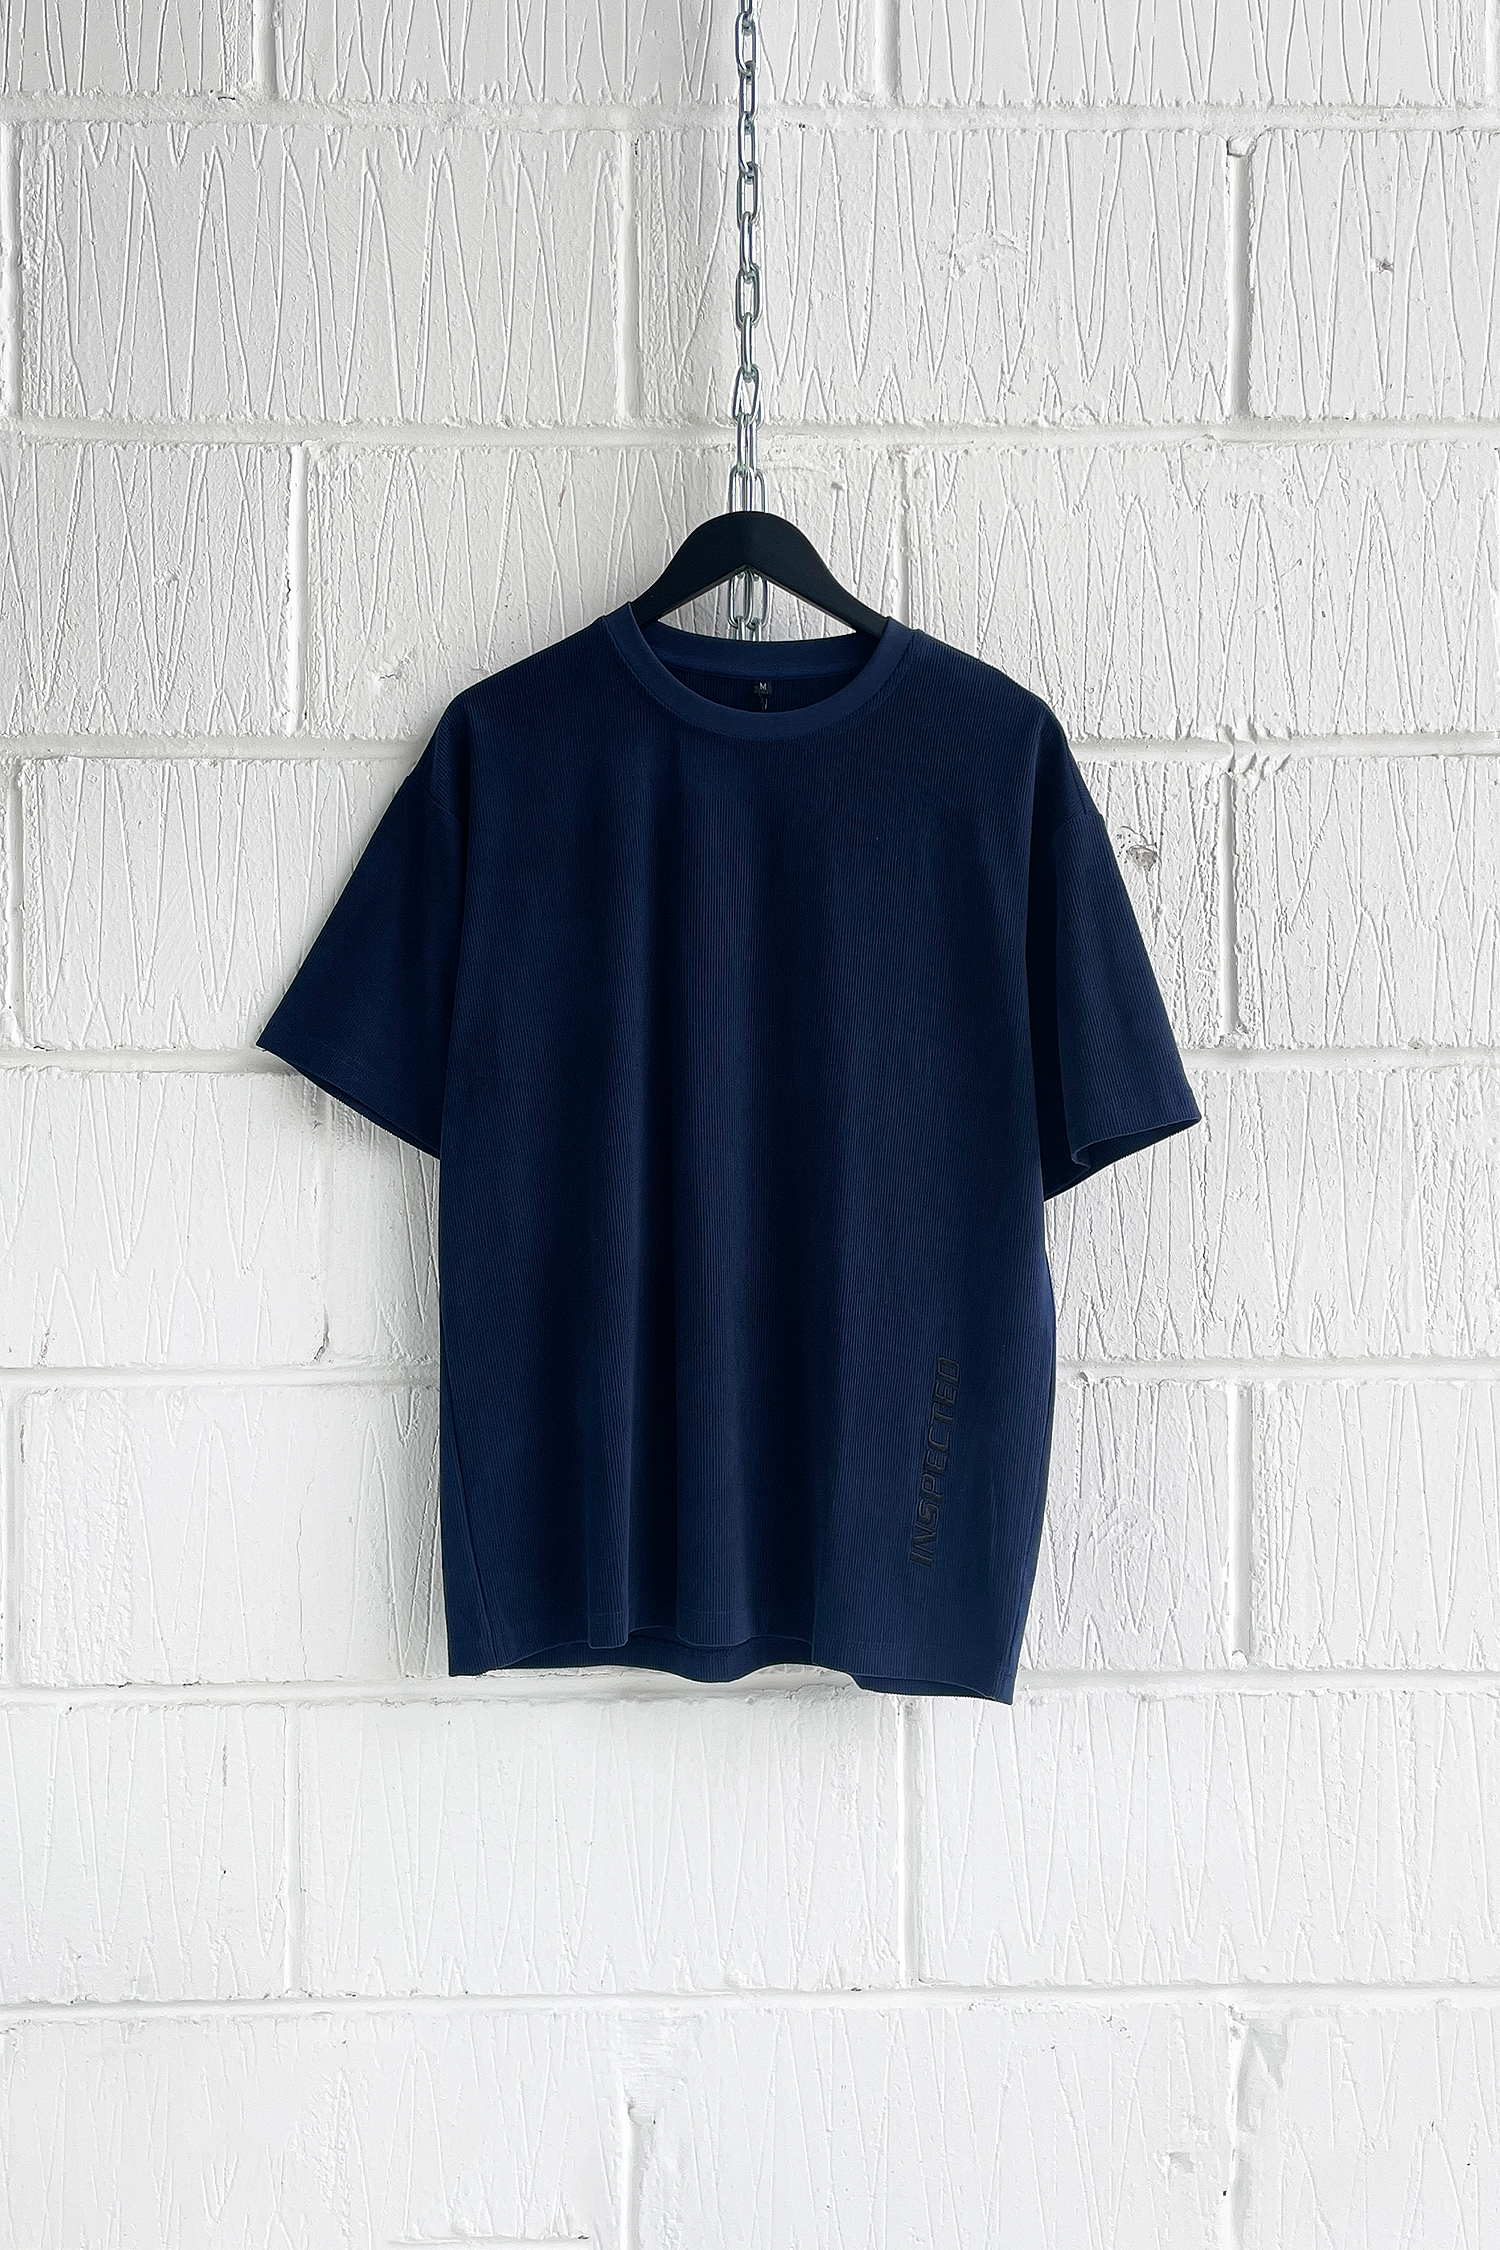 SAMPLE T-SHIRT — NAVY COURDROY (M)